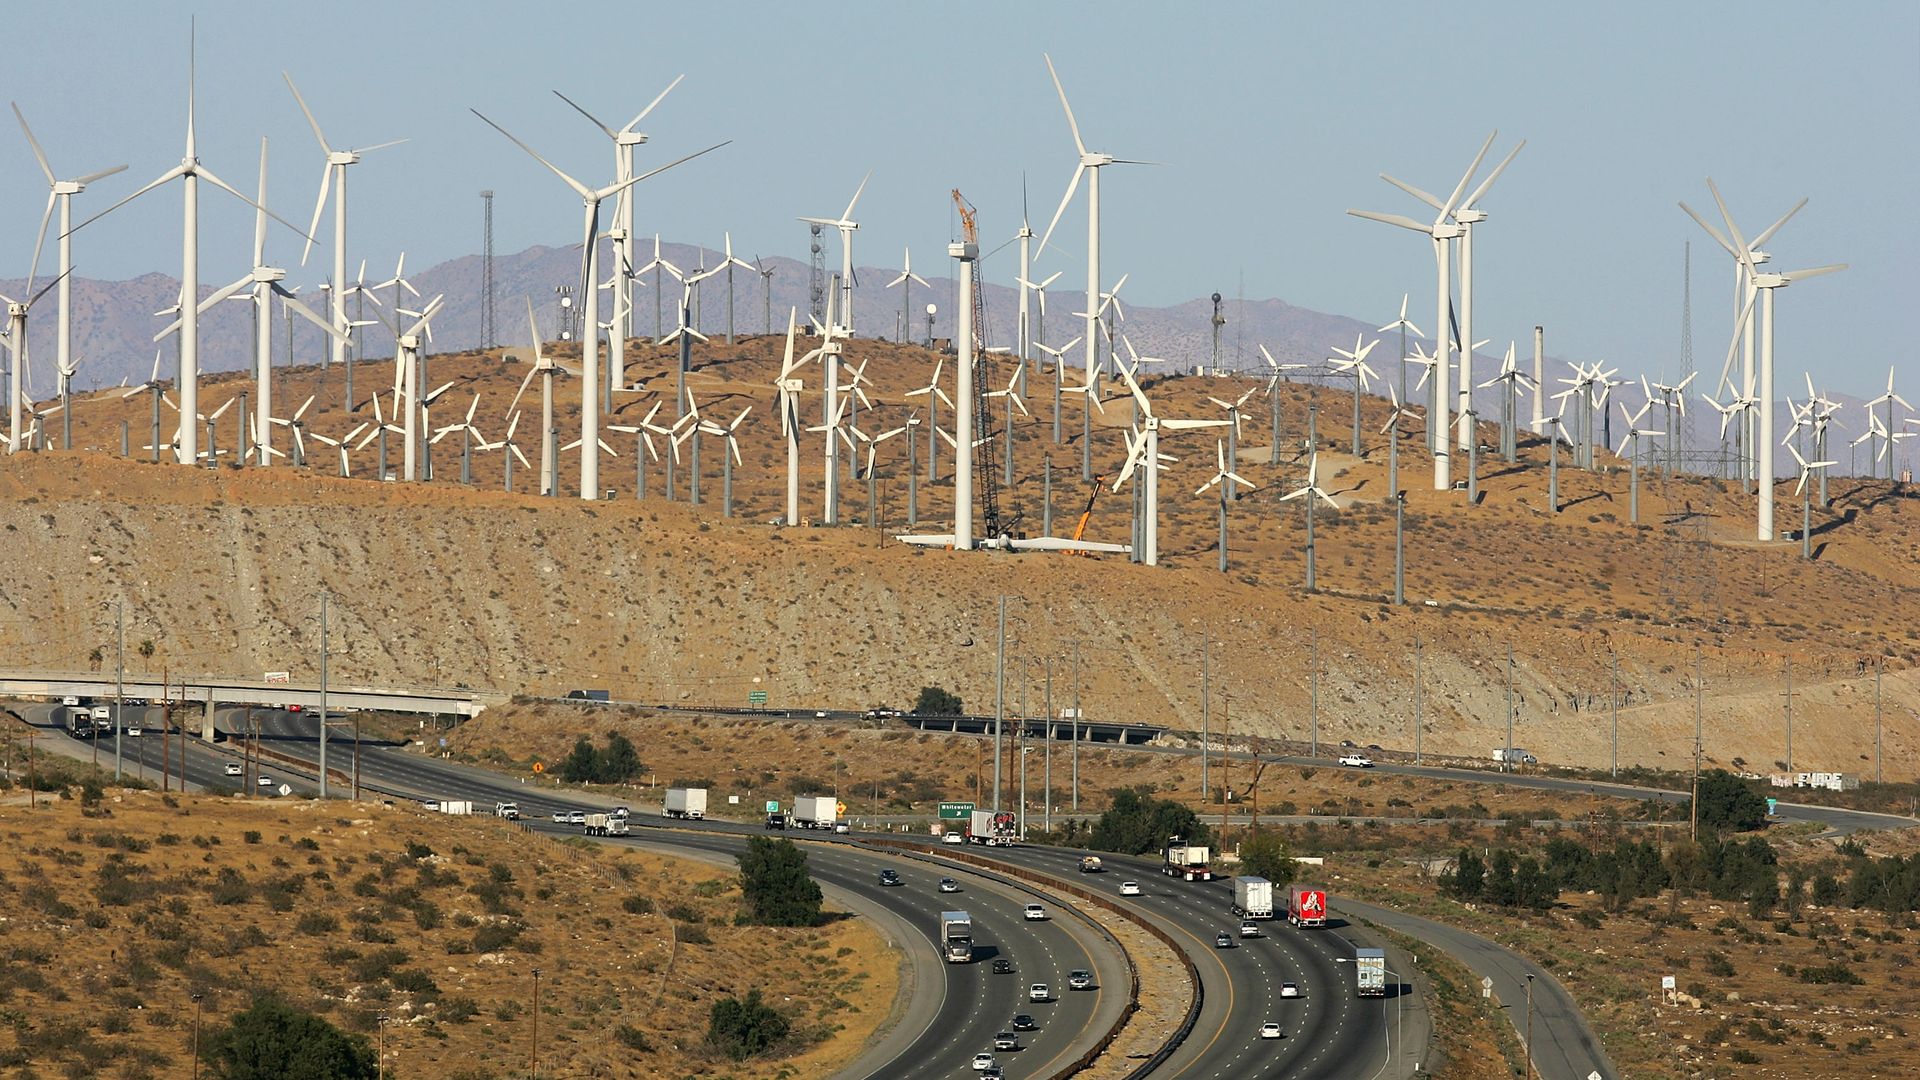 Giant wind turbines are powered by strong prevailing winds on May 13, 2008 near Palm Springs, California.